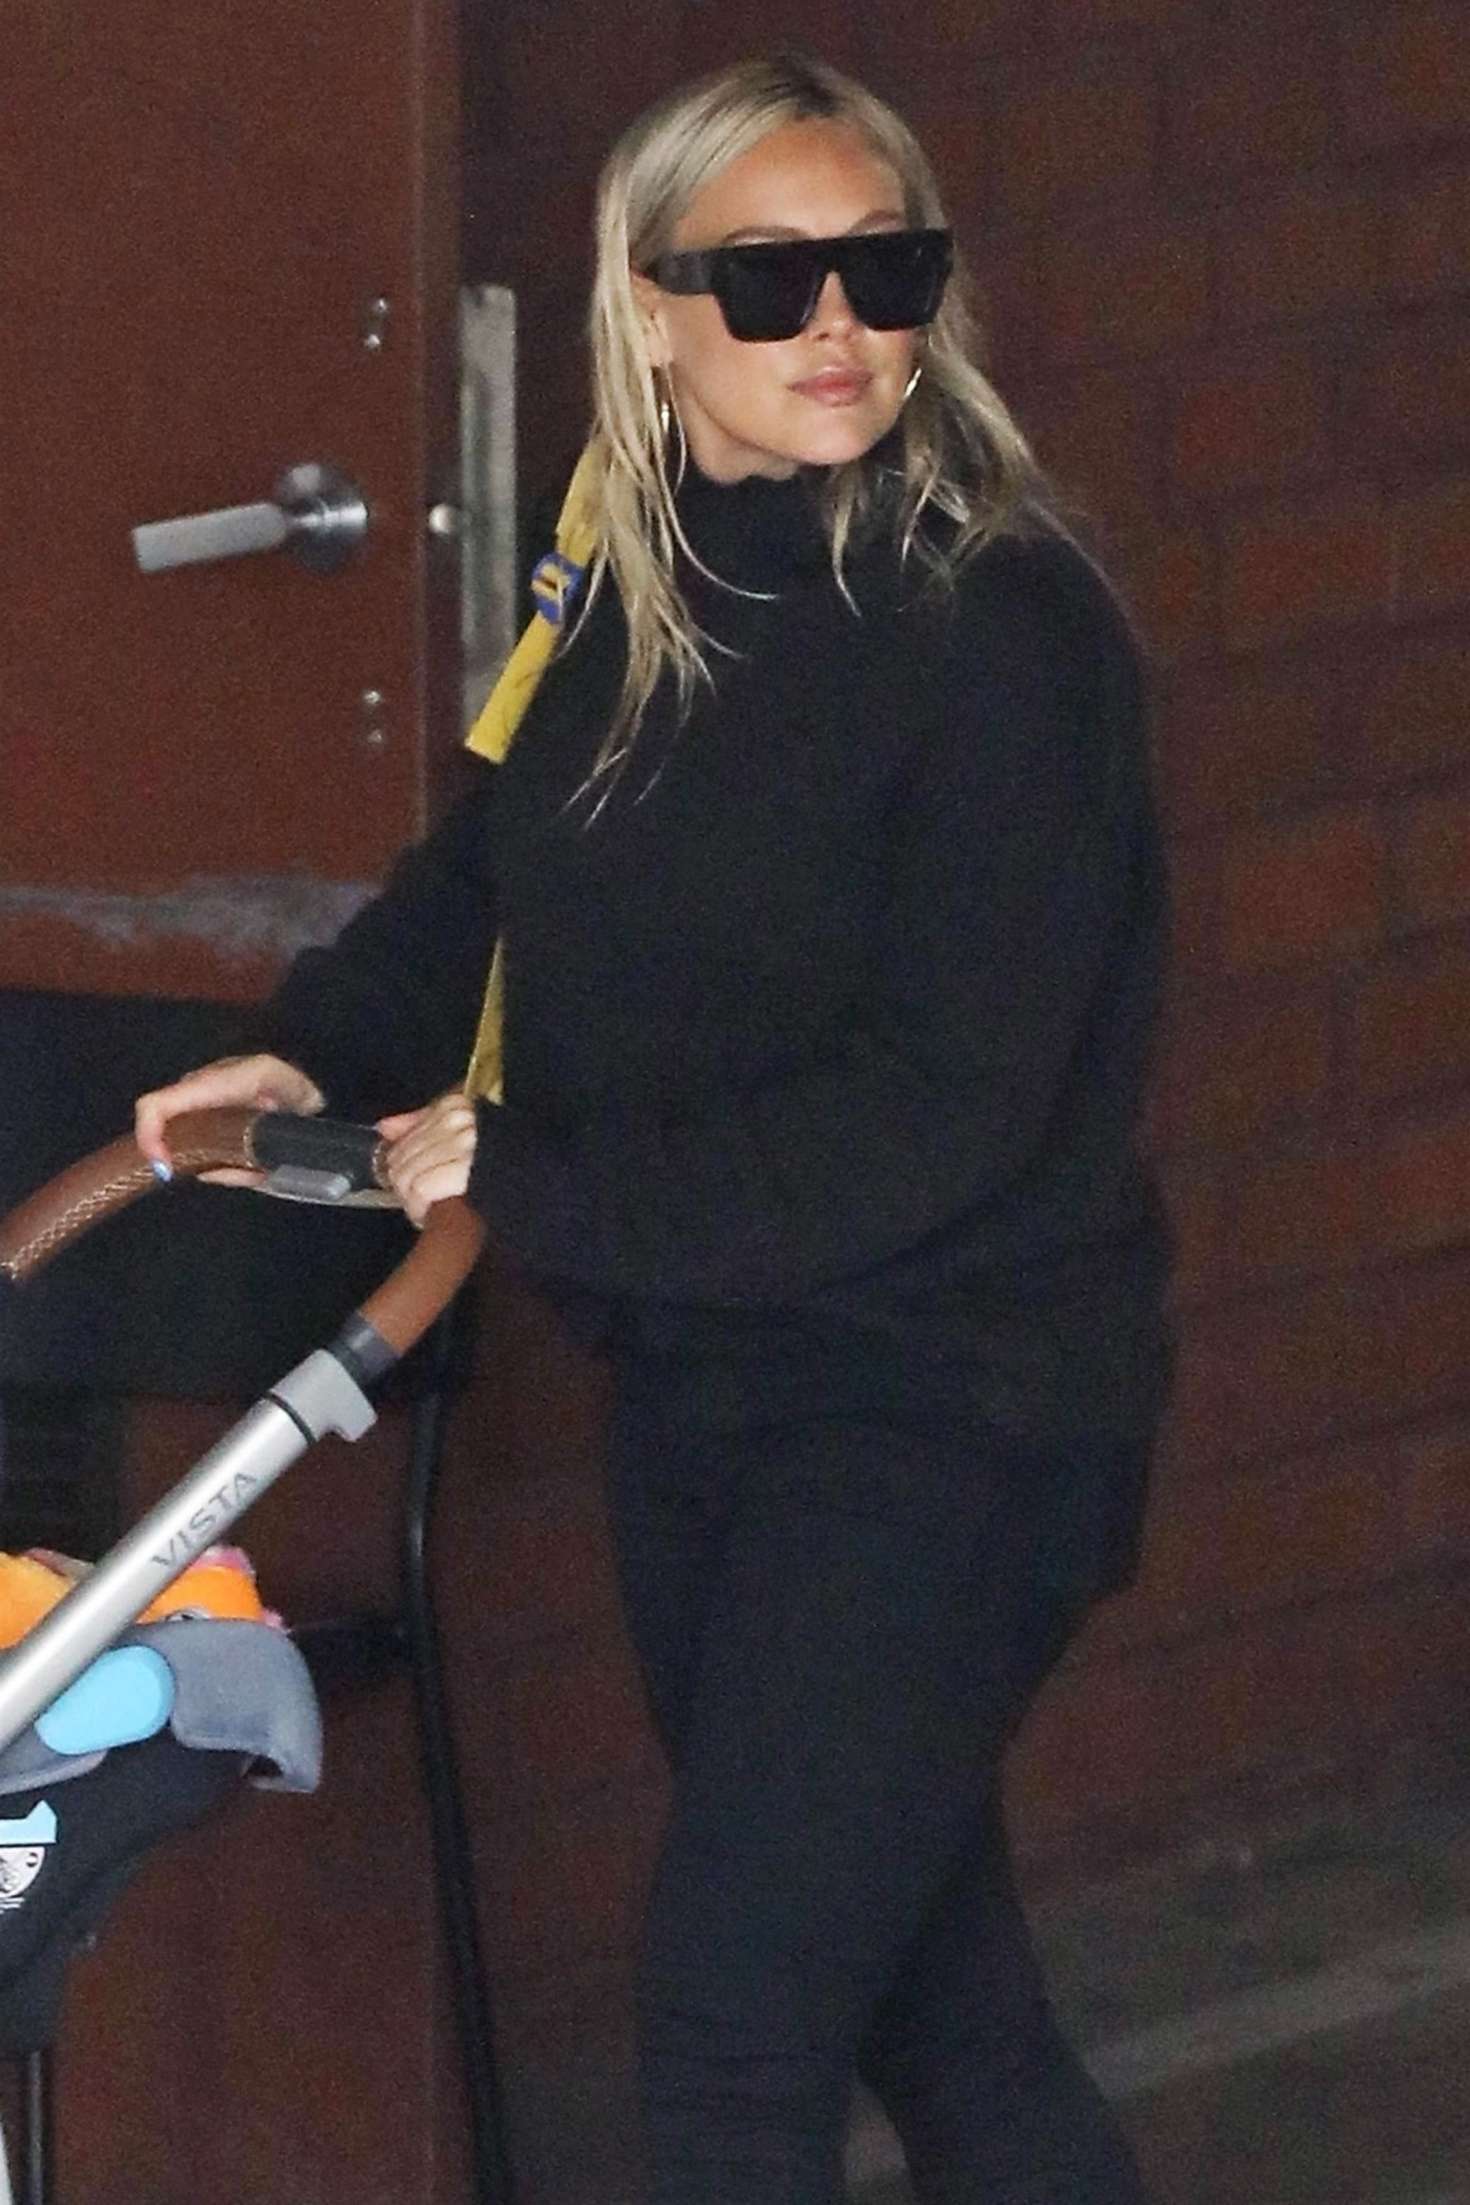 Hilary Duff at Melrose Place in West Hollywood